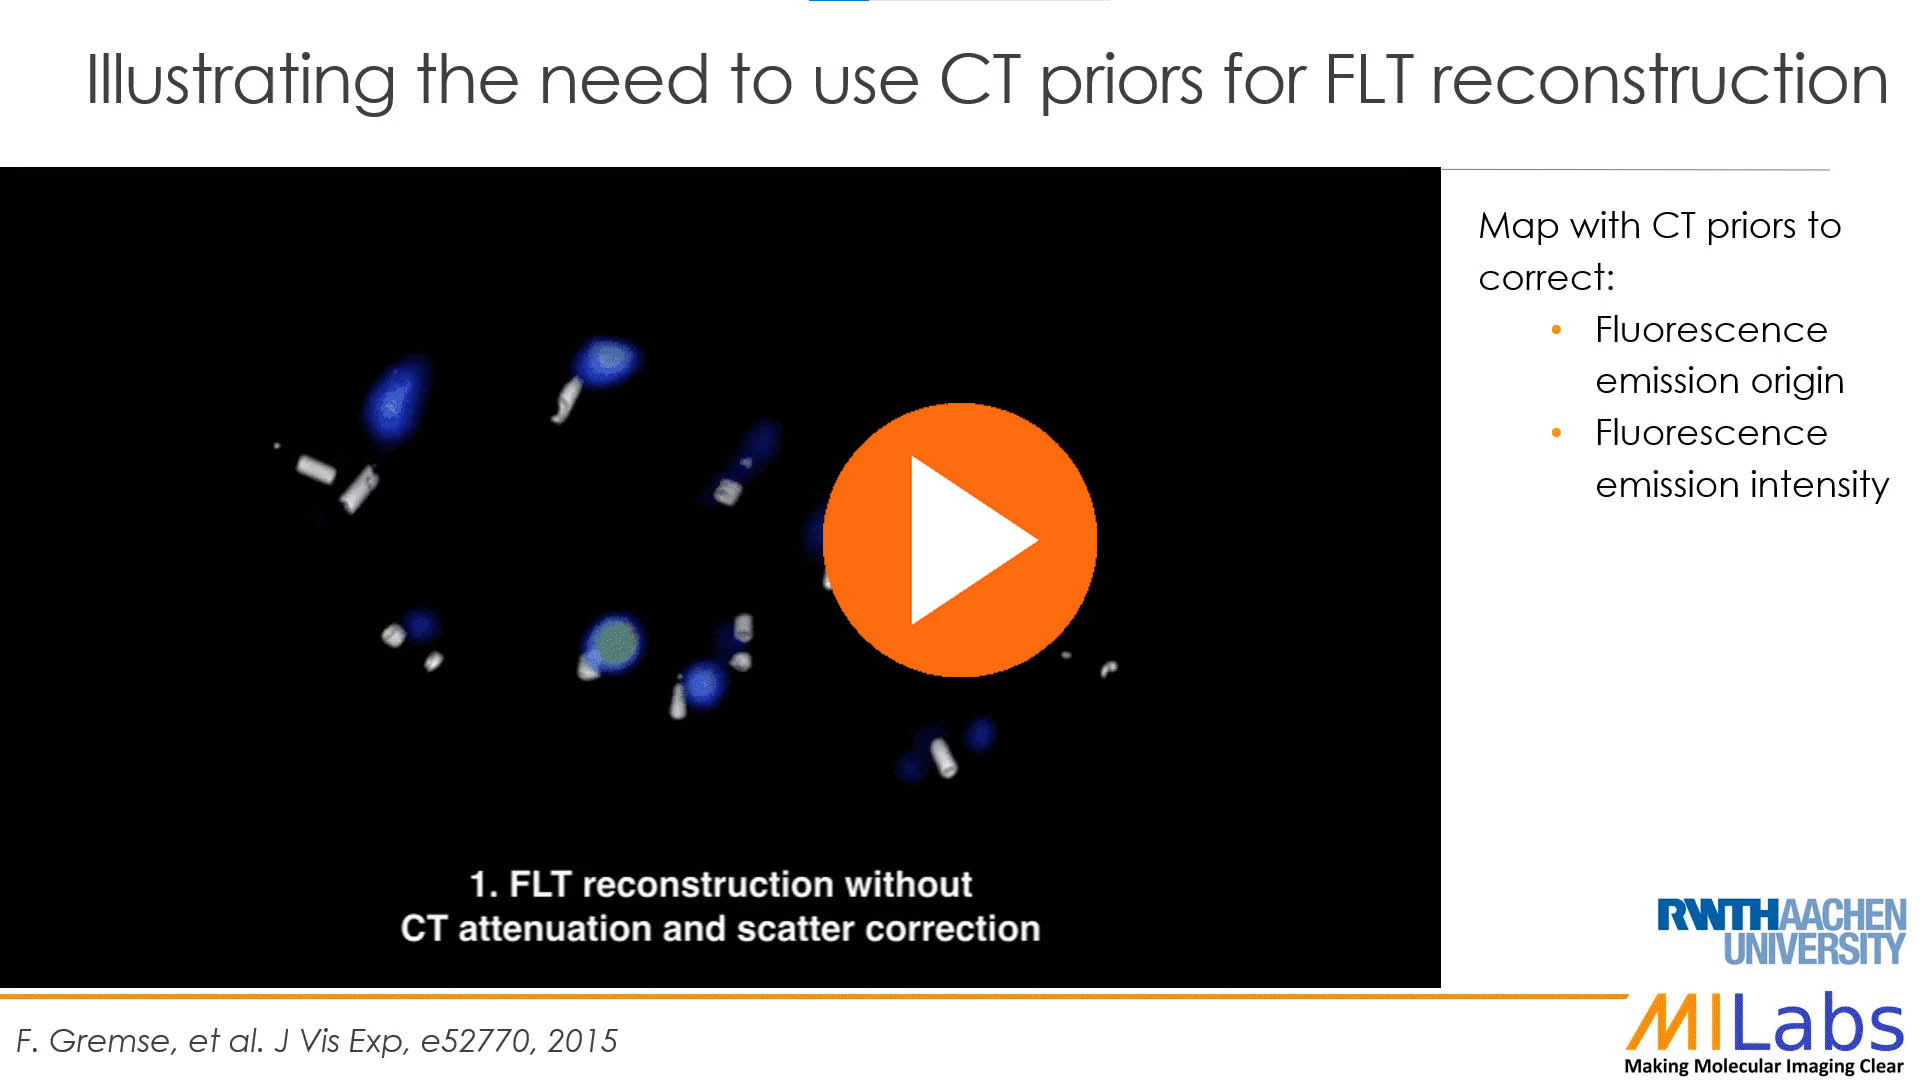 use microCT priors for fluorescence reconstruction